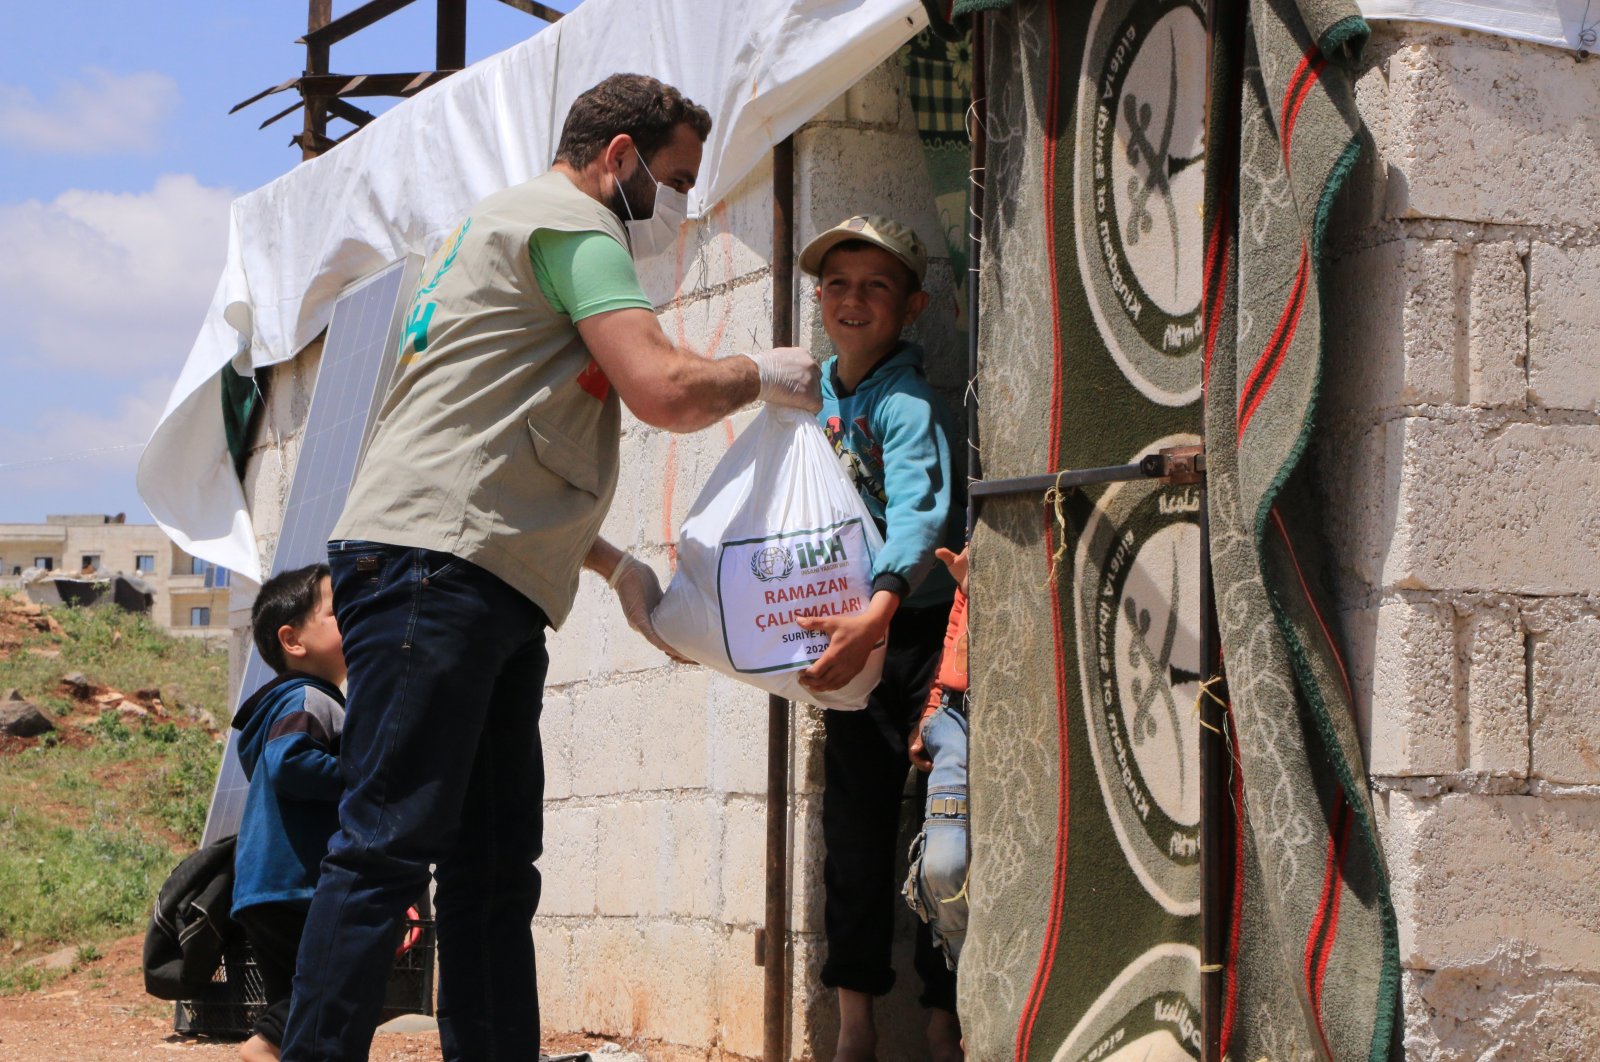 A İHH worker distributes aid to families in northwestern Syria’s Afrin, May 12, 2020. (AA Photo)